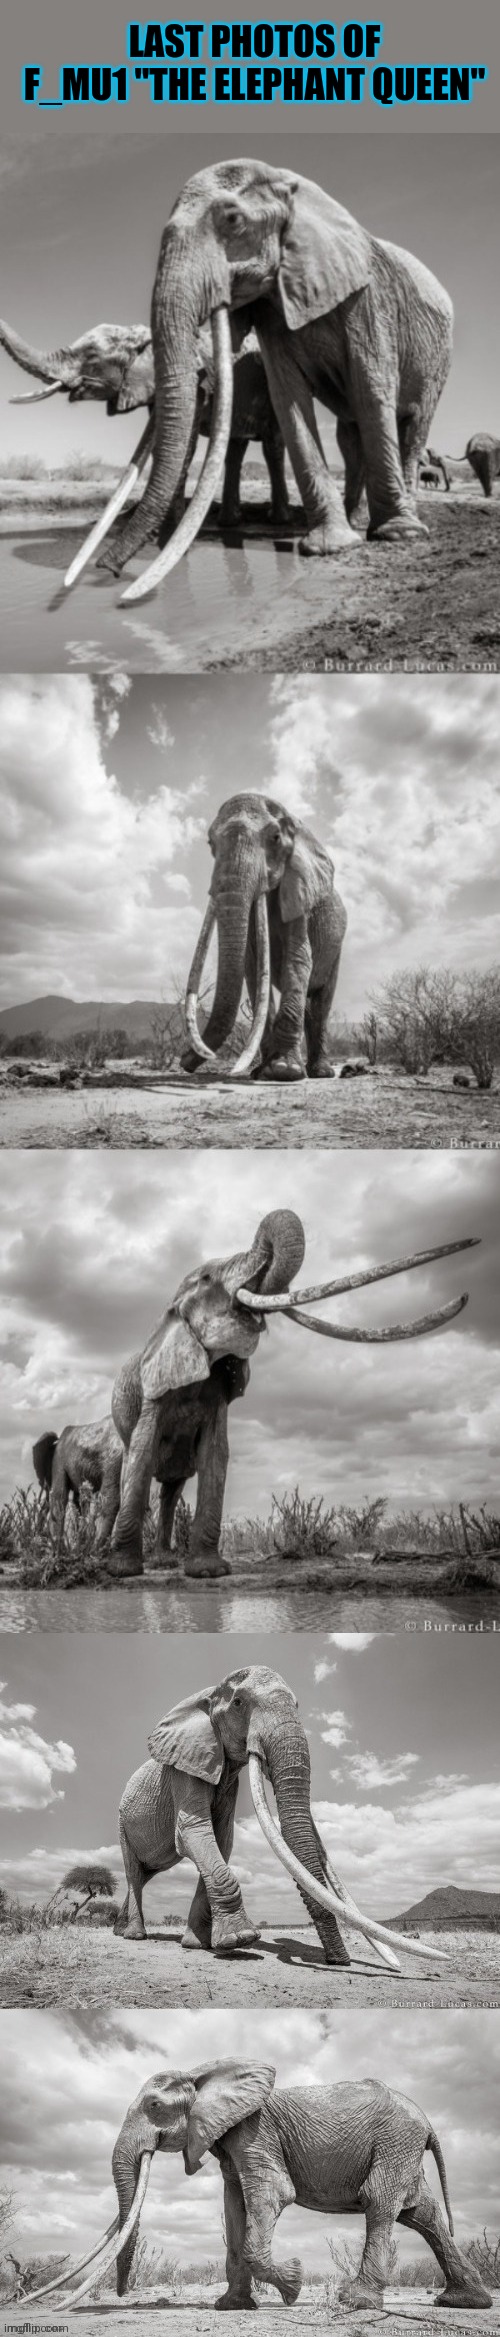 Taken by Will Burrard Lucas with "BeetleCam" (she died of natural causes shortly thereafter at over 60) | LAST PHOTOS OF F_MU1 "THE ELEPHANT QUEEN" | image tagged in memes,elephant,wildlife | made w/ Imgflip meme maker